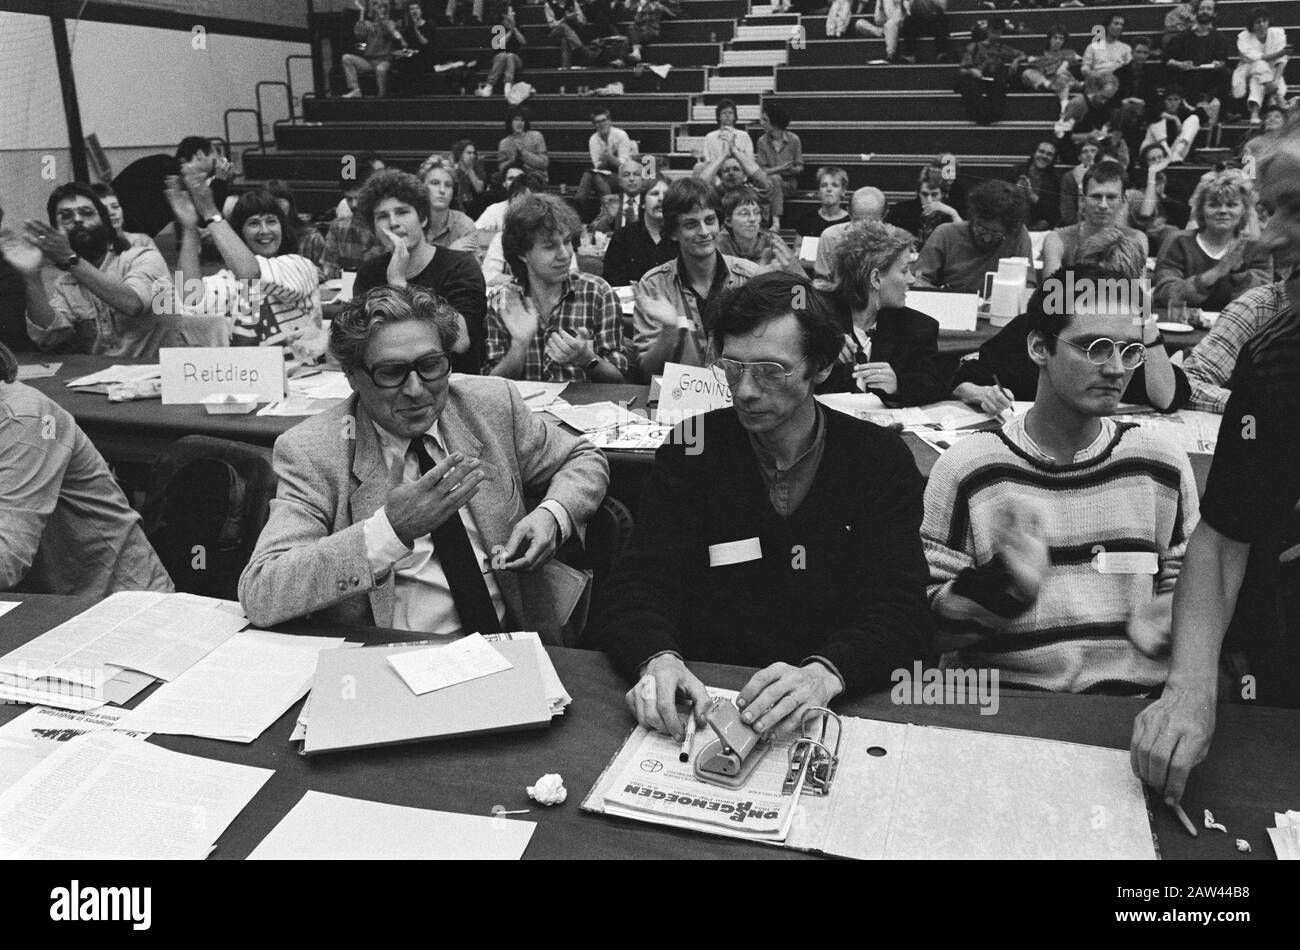 PSP congress in Utrecht, relief Fred van der Spek after the results of the Annotation vote: The vote involved collaboration with other small leftist areas caused, where Van der bacon was against. Favored the after party leader Andree van Es. Date: June 29, 1985 Location: Utrecht (city) Keywords: conferences, politicians, political parties Person Name: Bacon, Fred van der Stock Photo